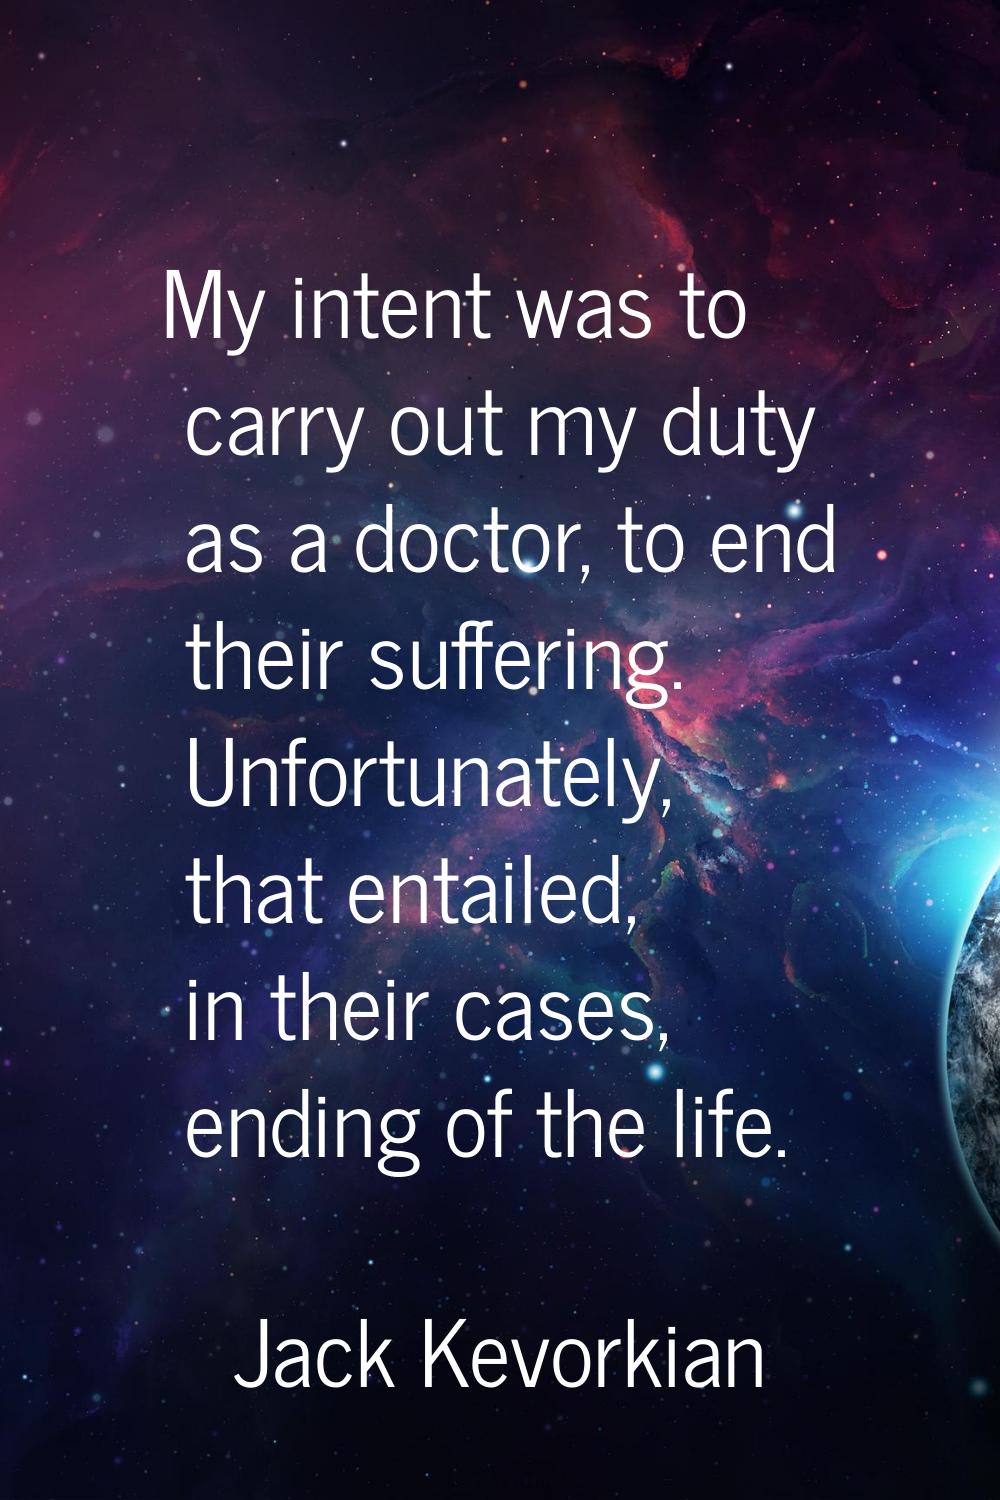 My intent was to carry out my duty as a doctor, to end their suffering. Unfortunately, that entaile